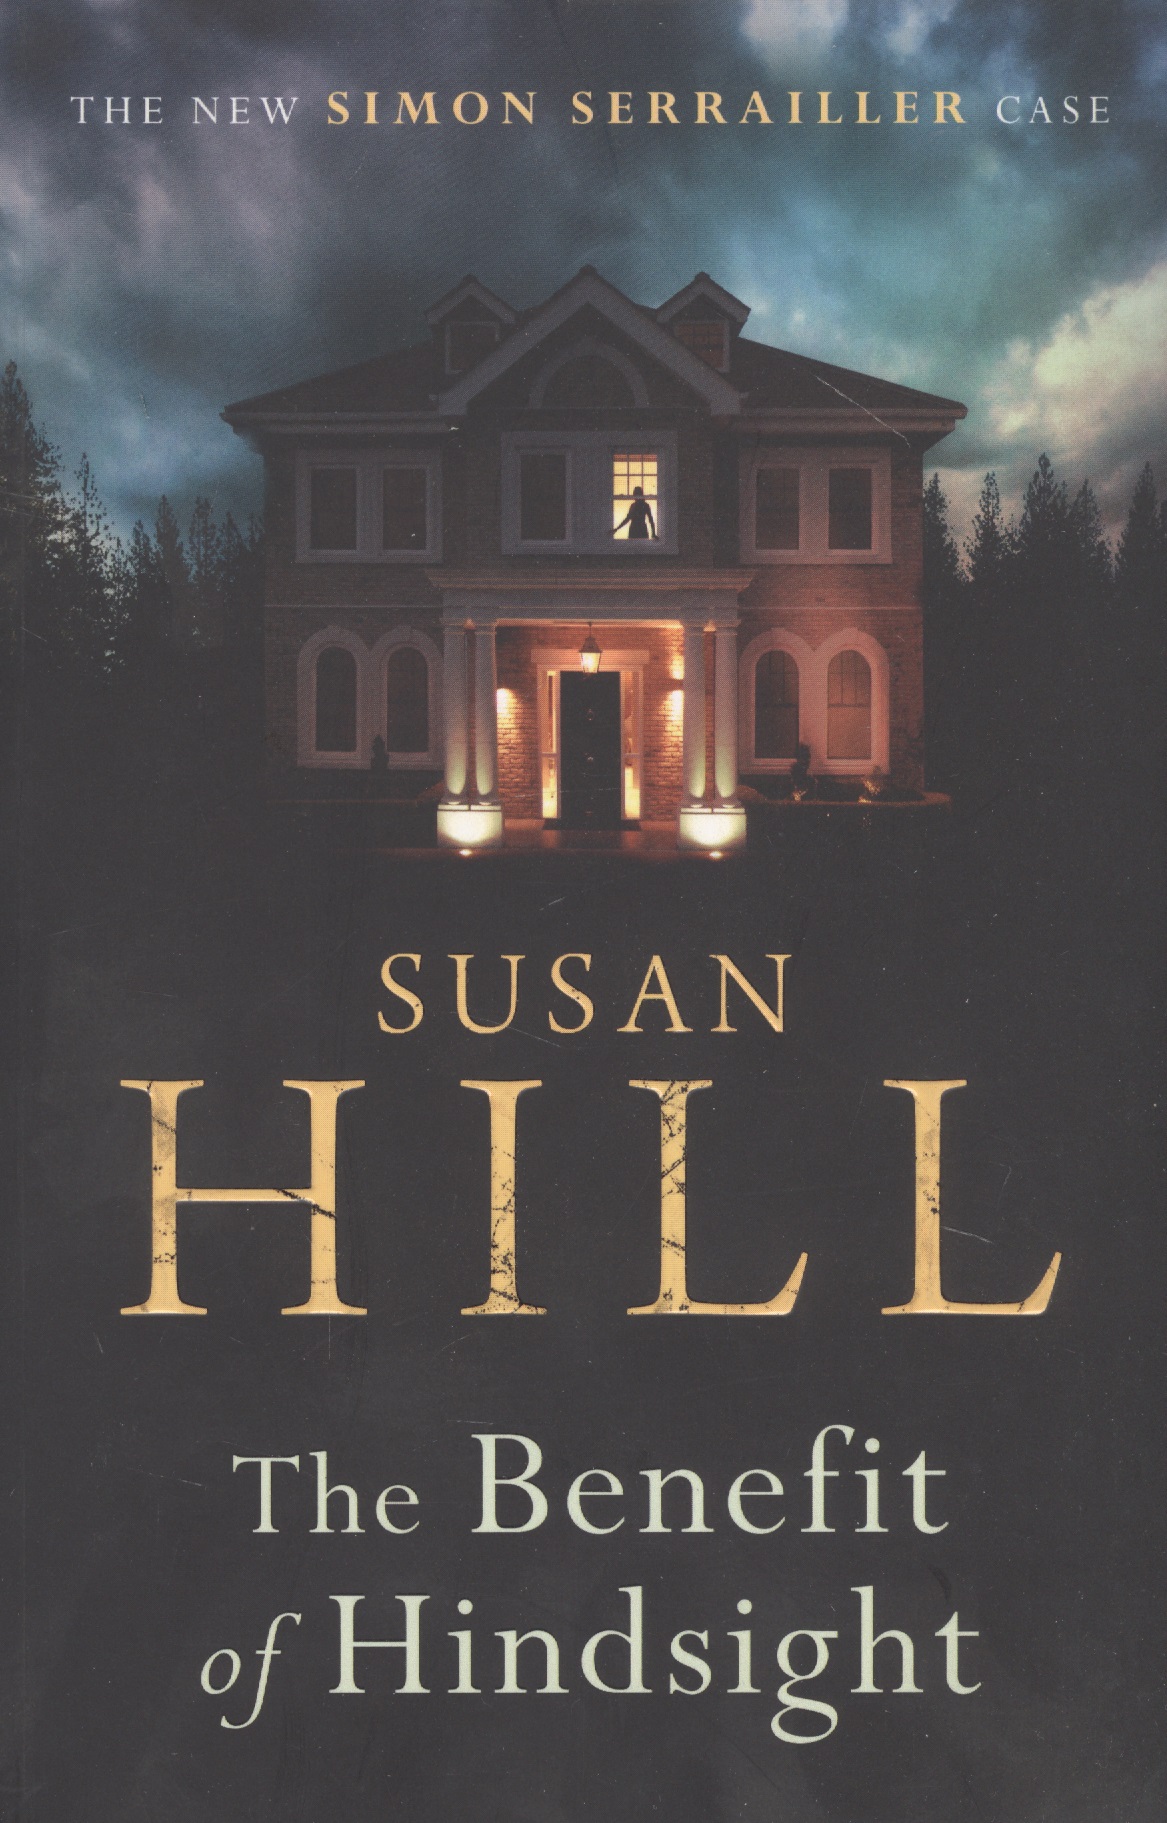 hill susan the betrayal of trust Hill Susan The Benefit of Hindsight